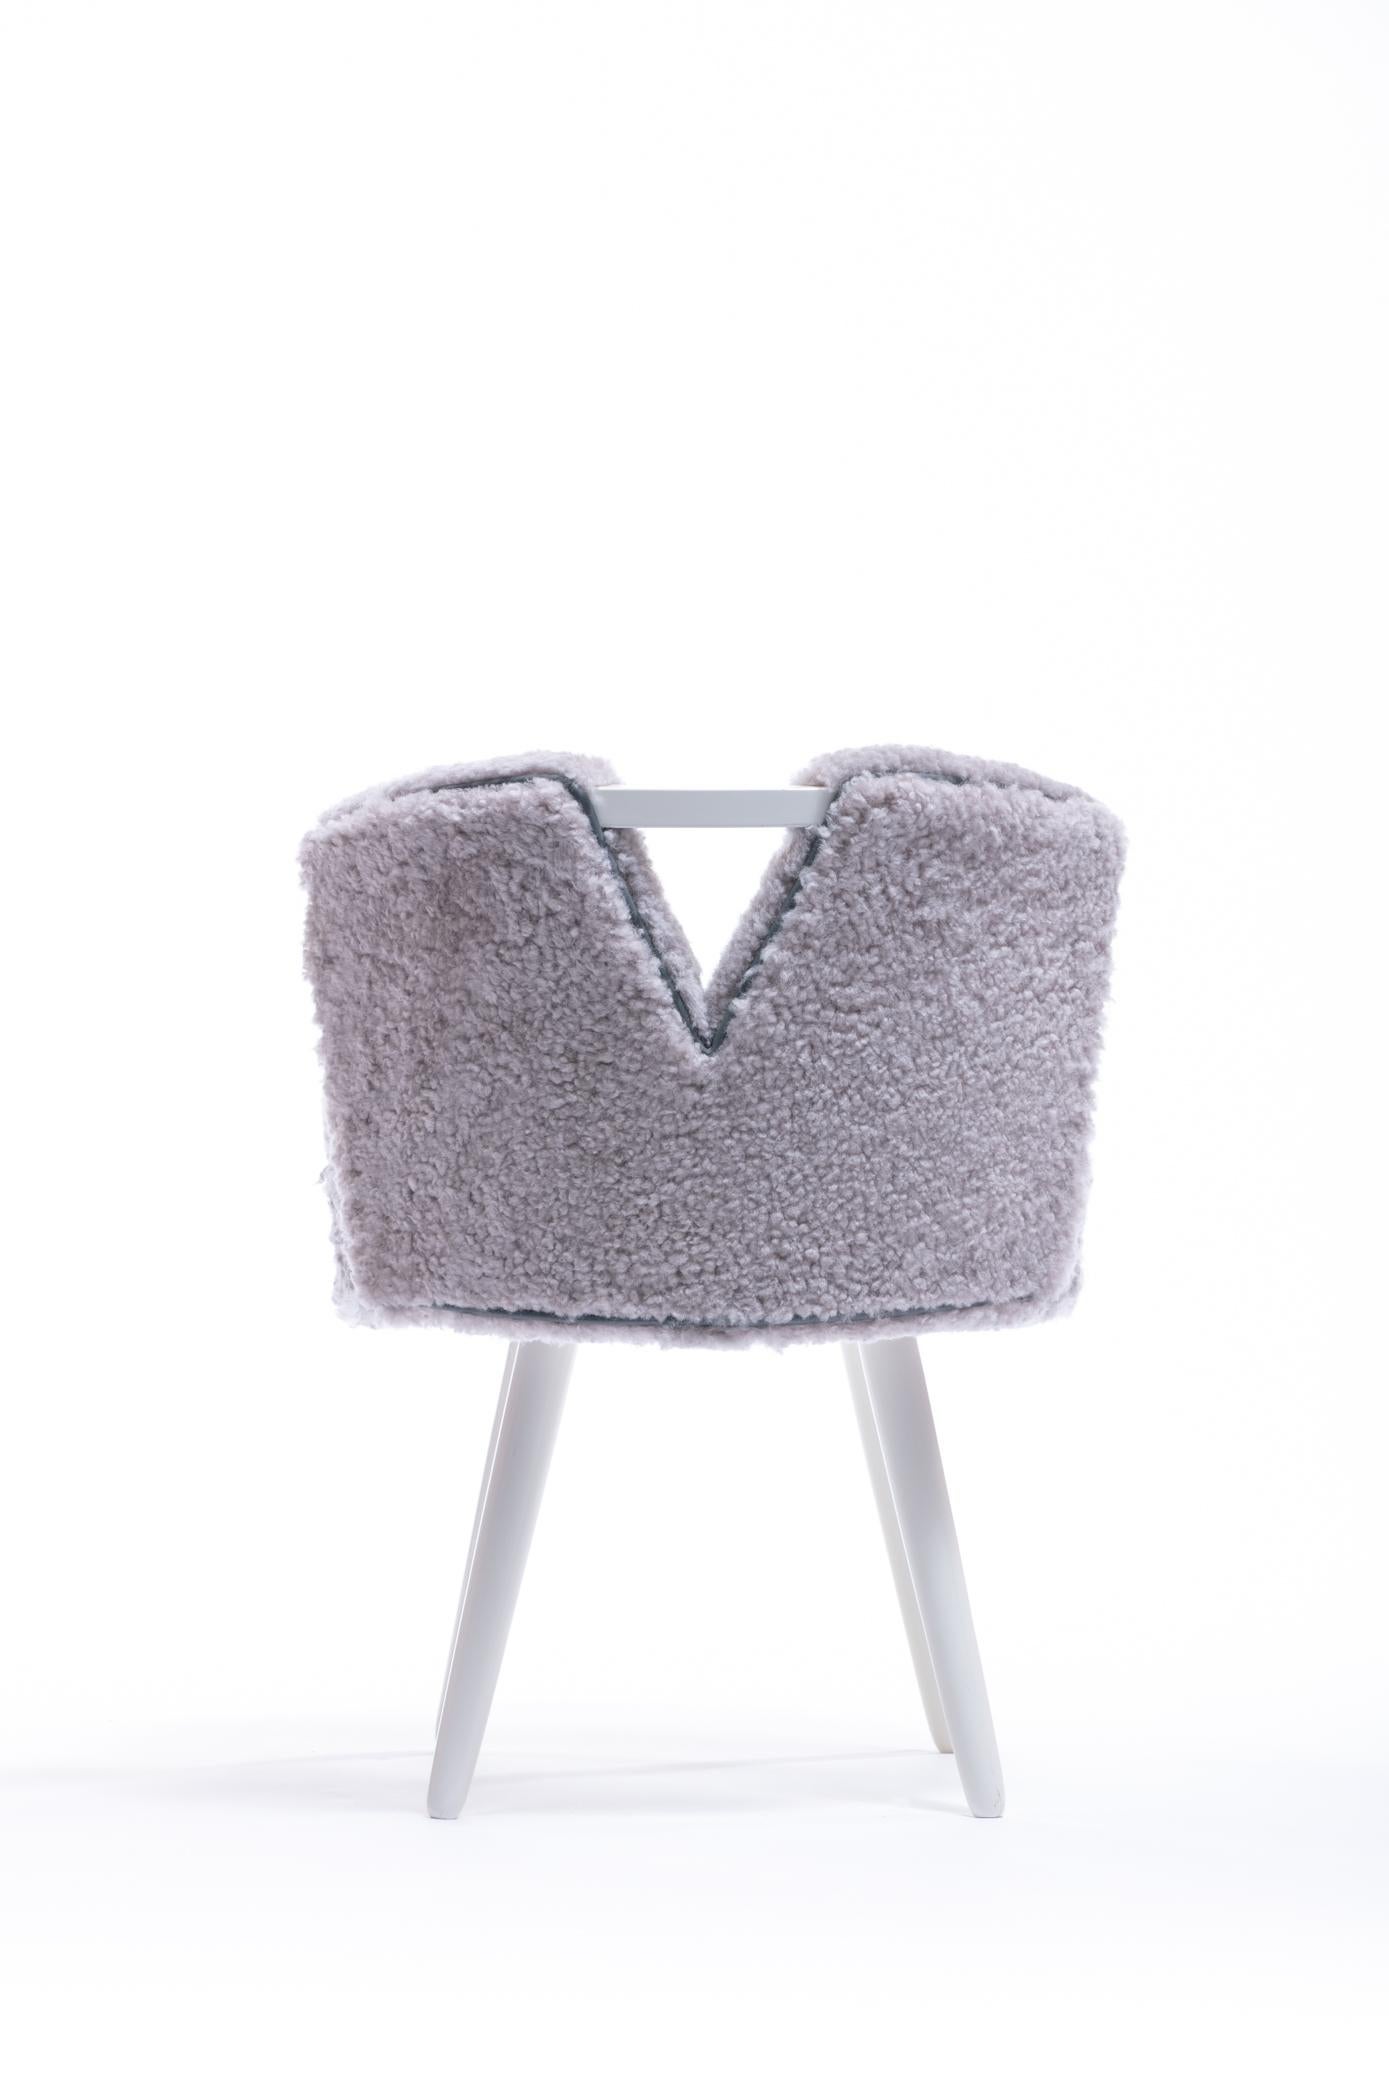 Paul Frankl Style Vanity Stool Upholstered in Shearling For Sale 2